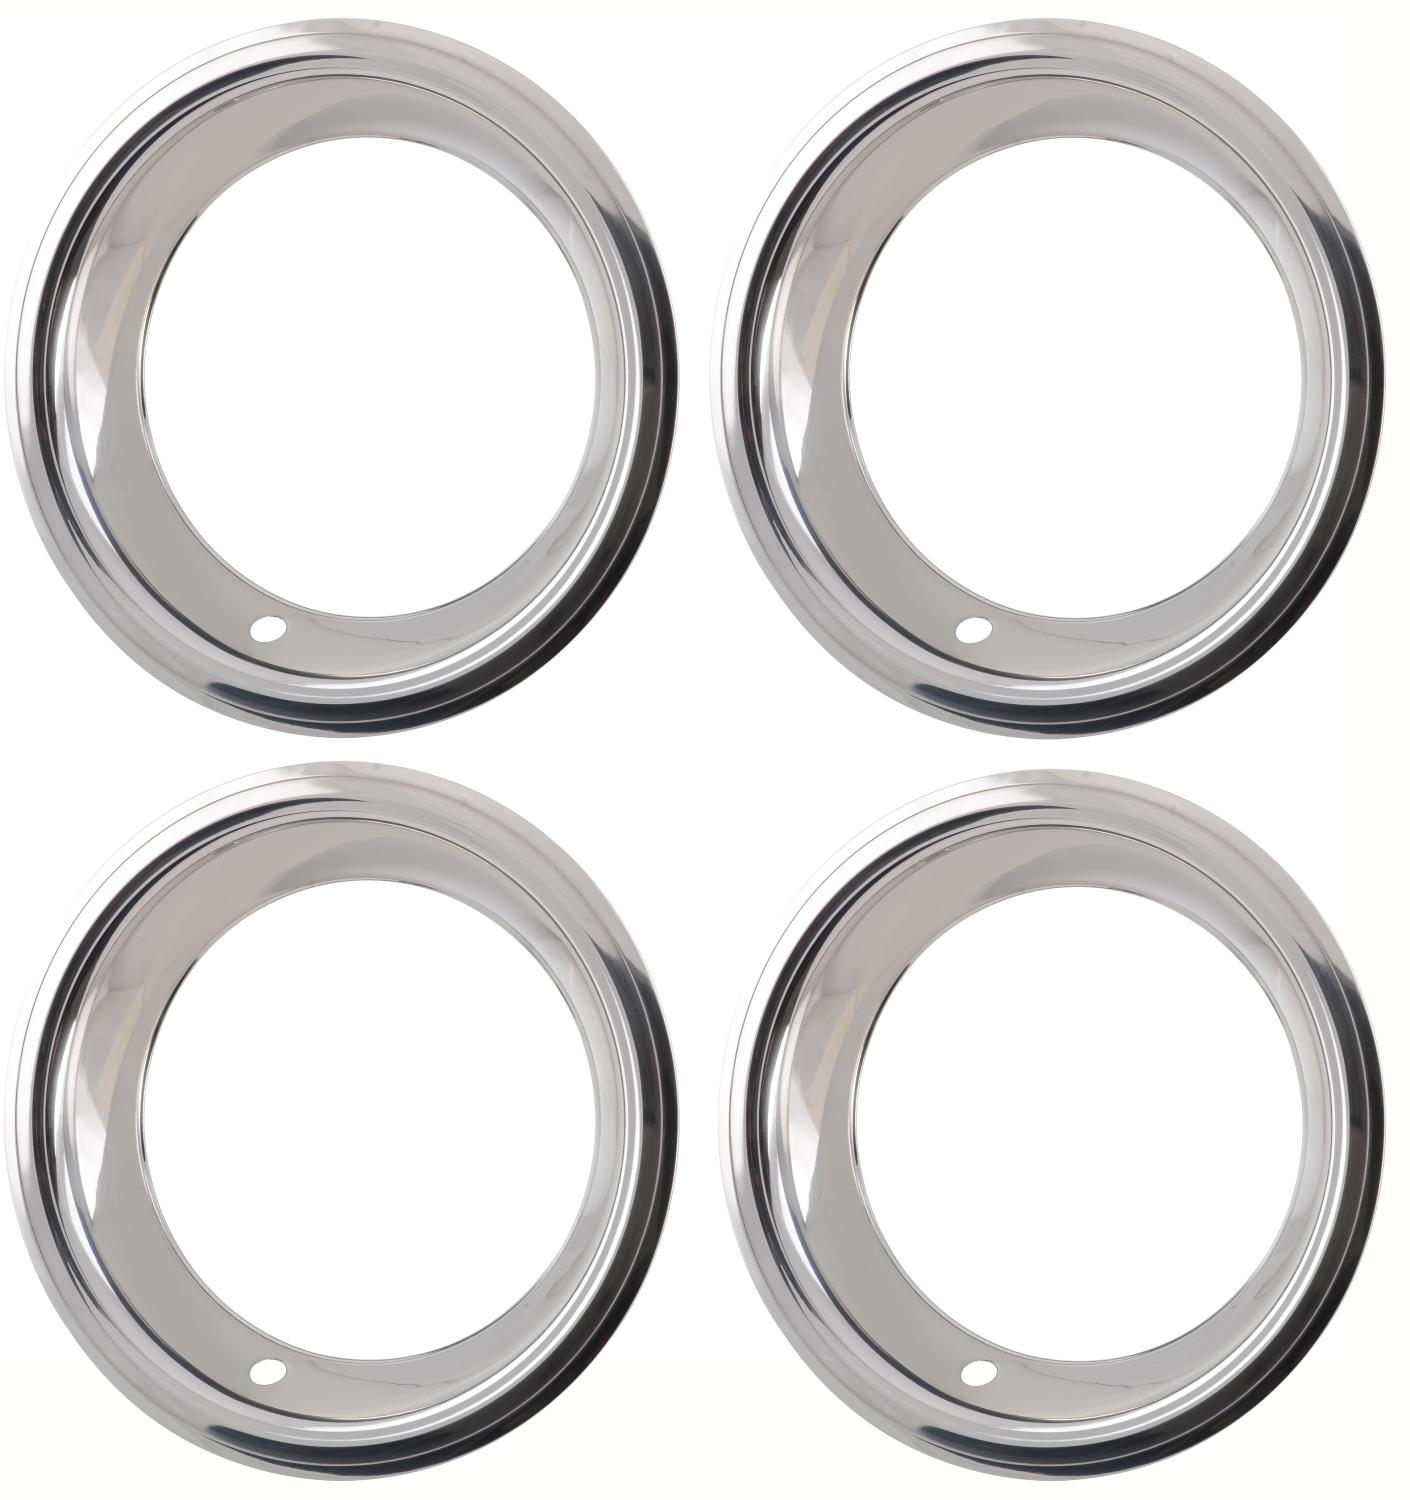 Rally Wheel Trim Ring Set for JEGS 15